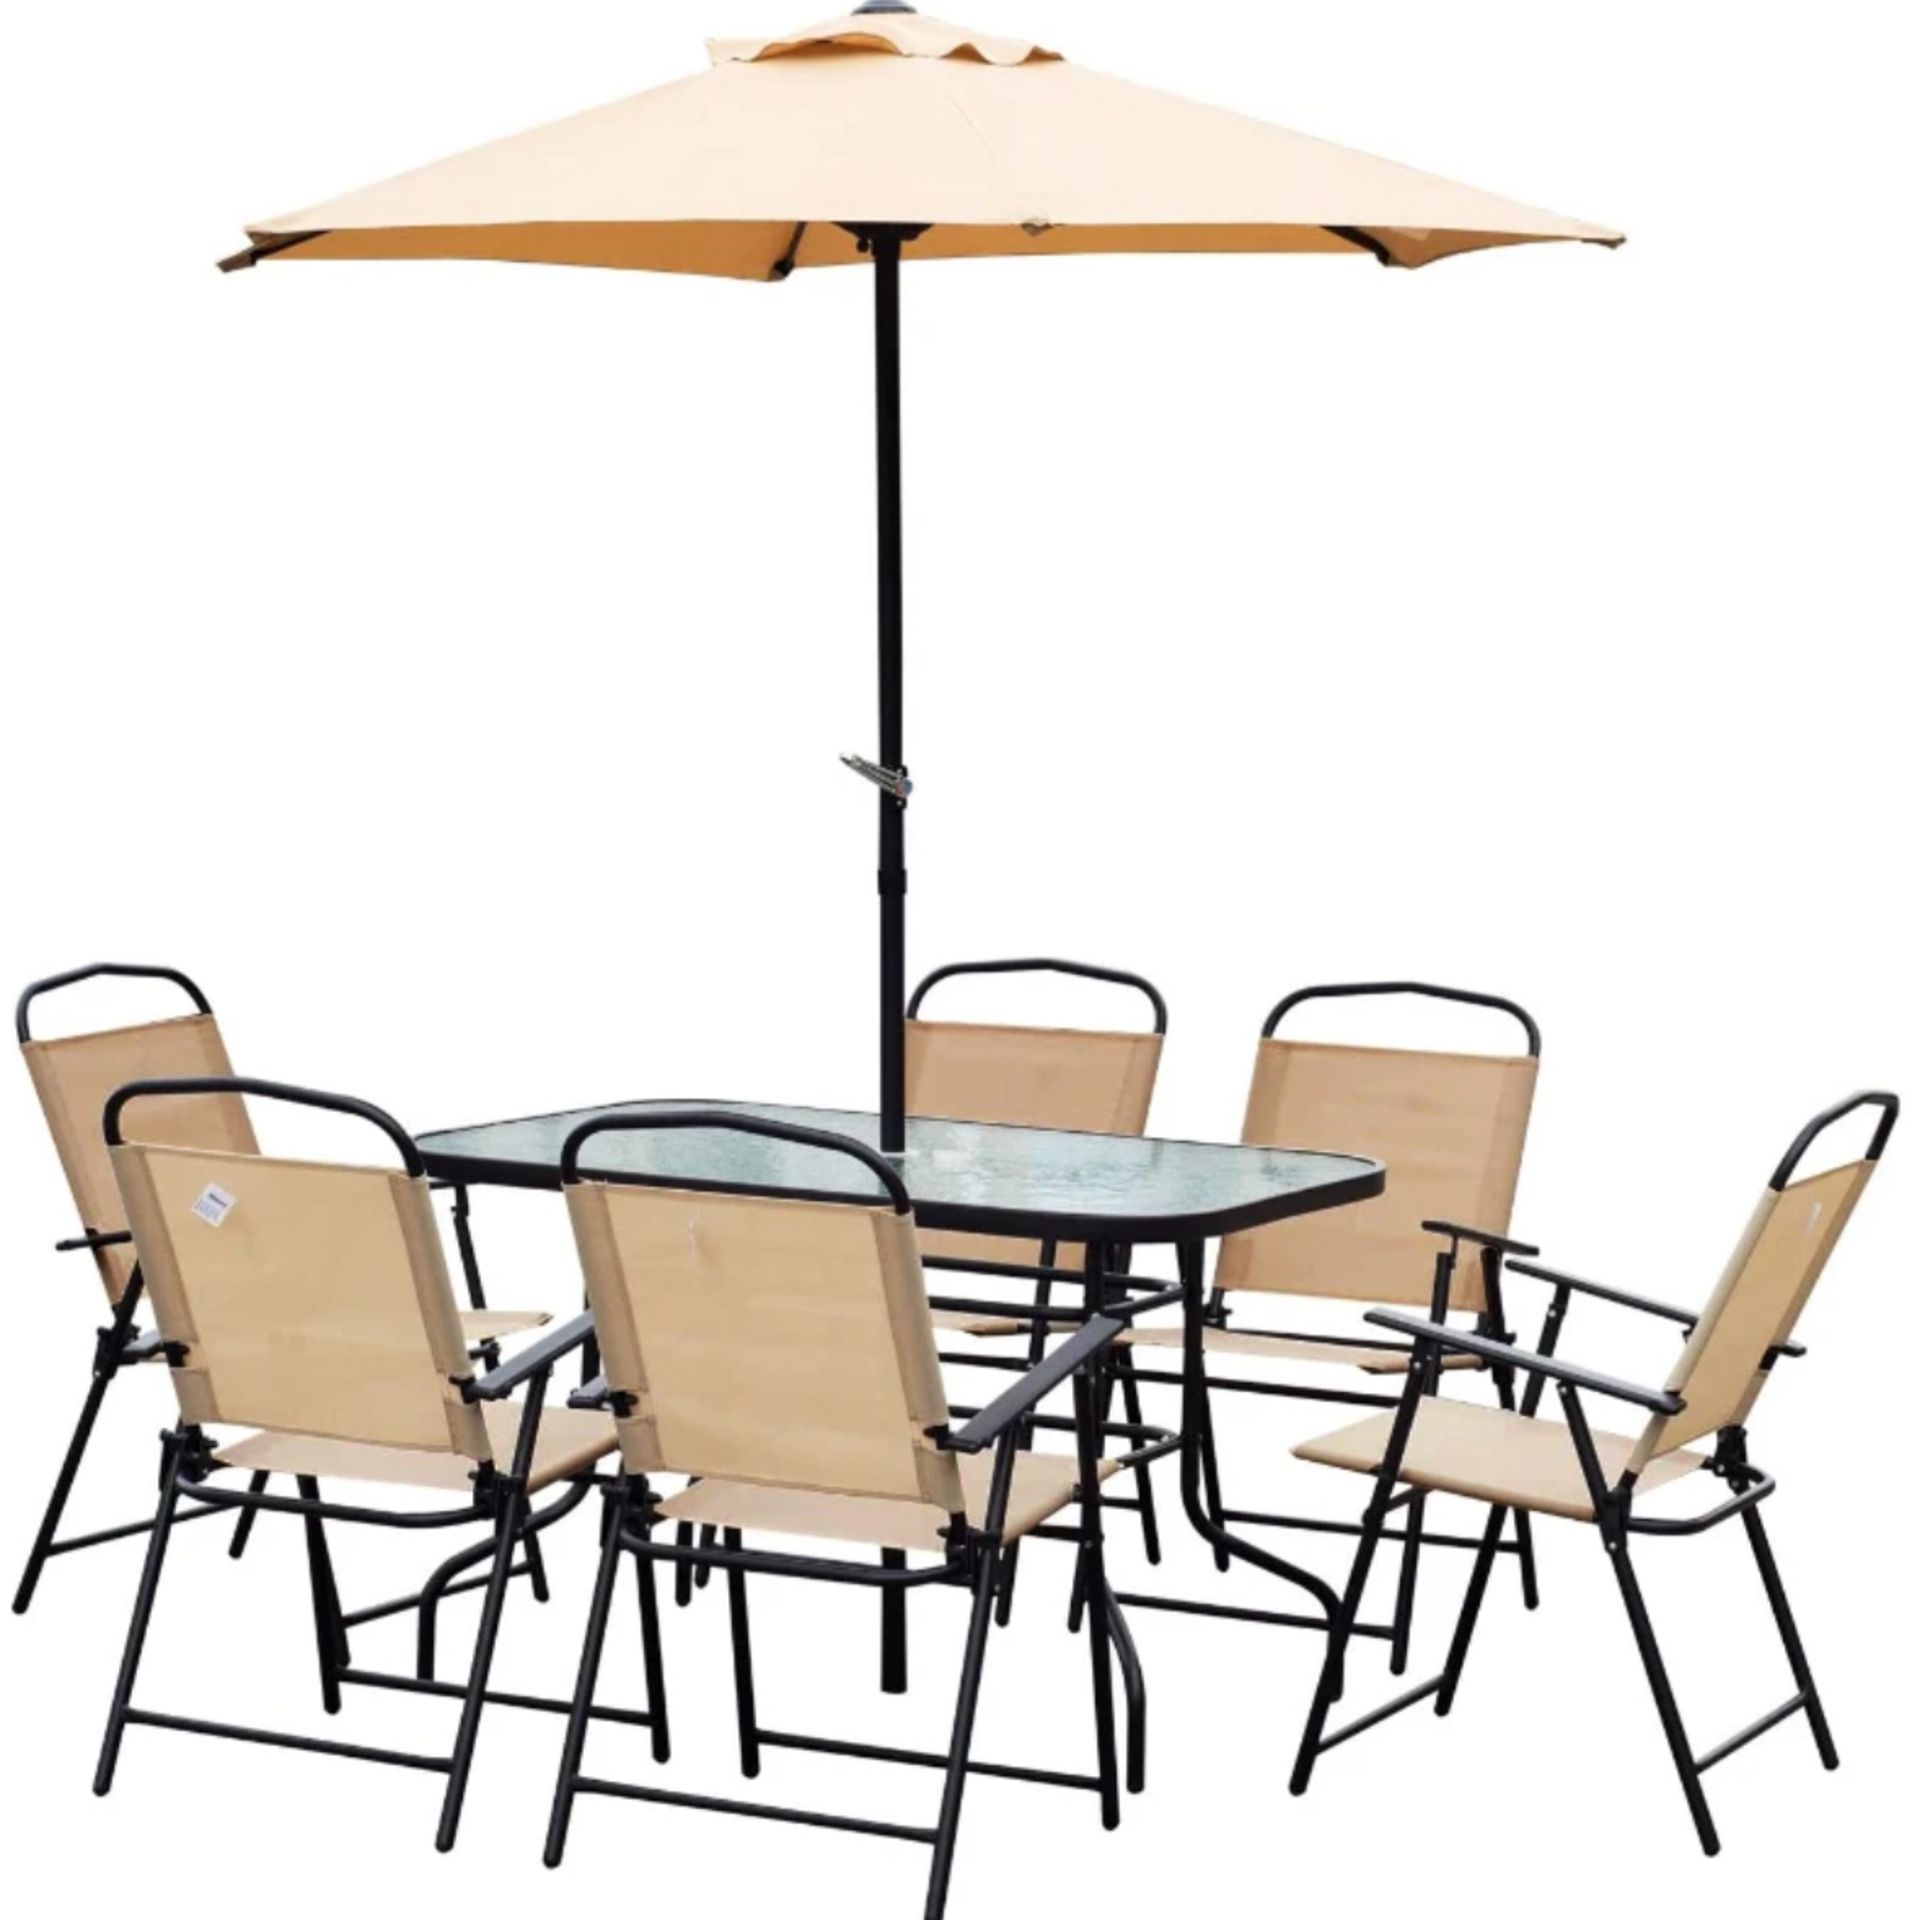 LOT CONTAINING 5 X BRAND NEW GARDEN FURNITURE SETS